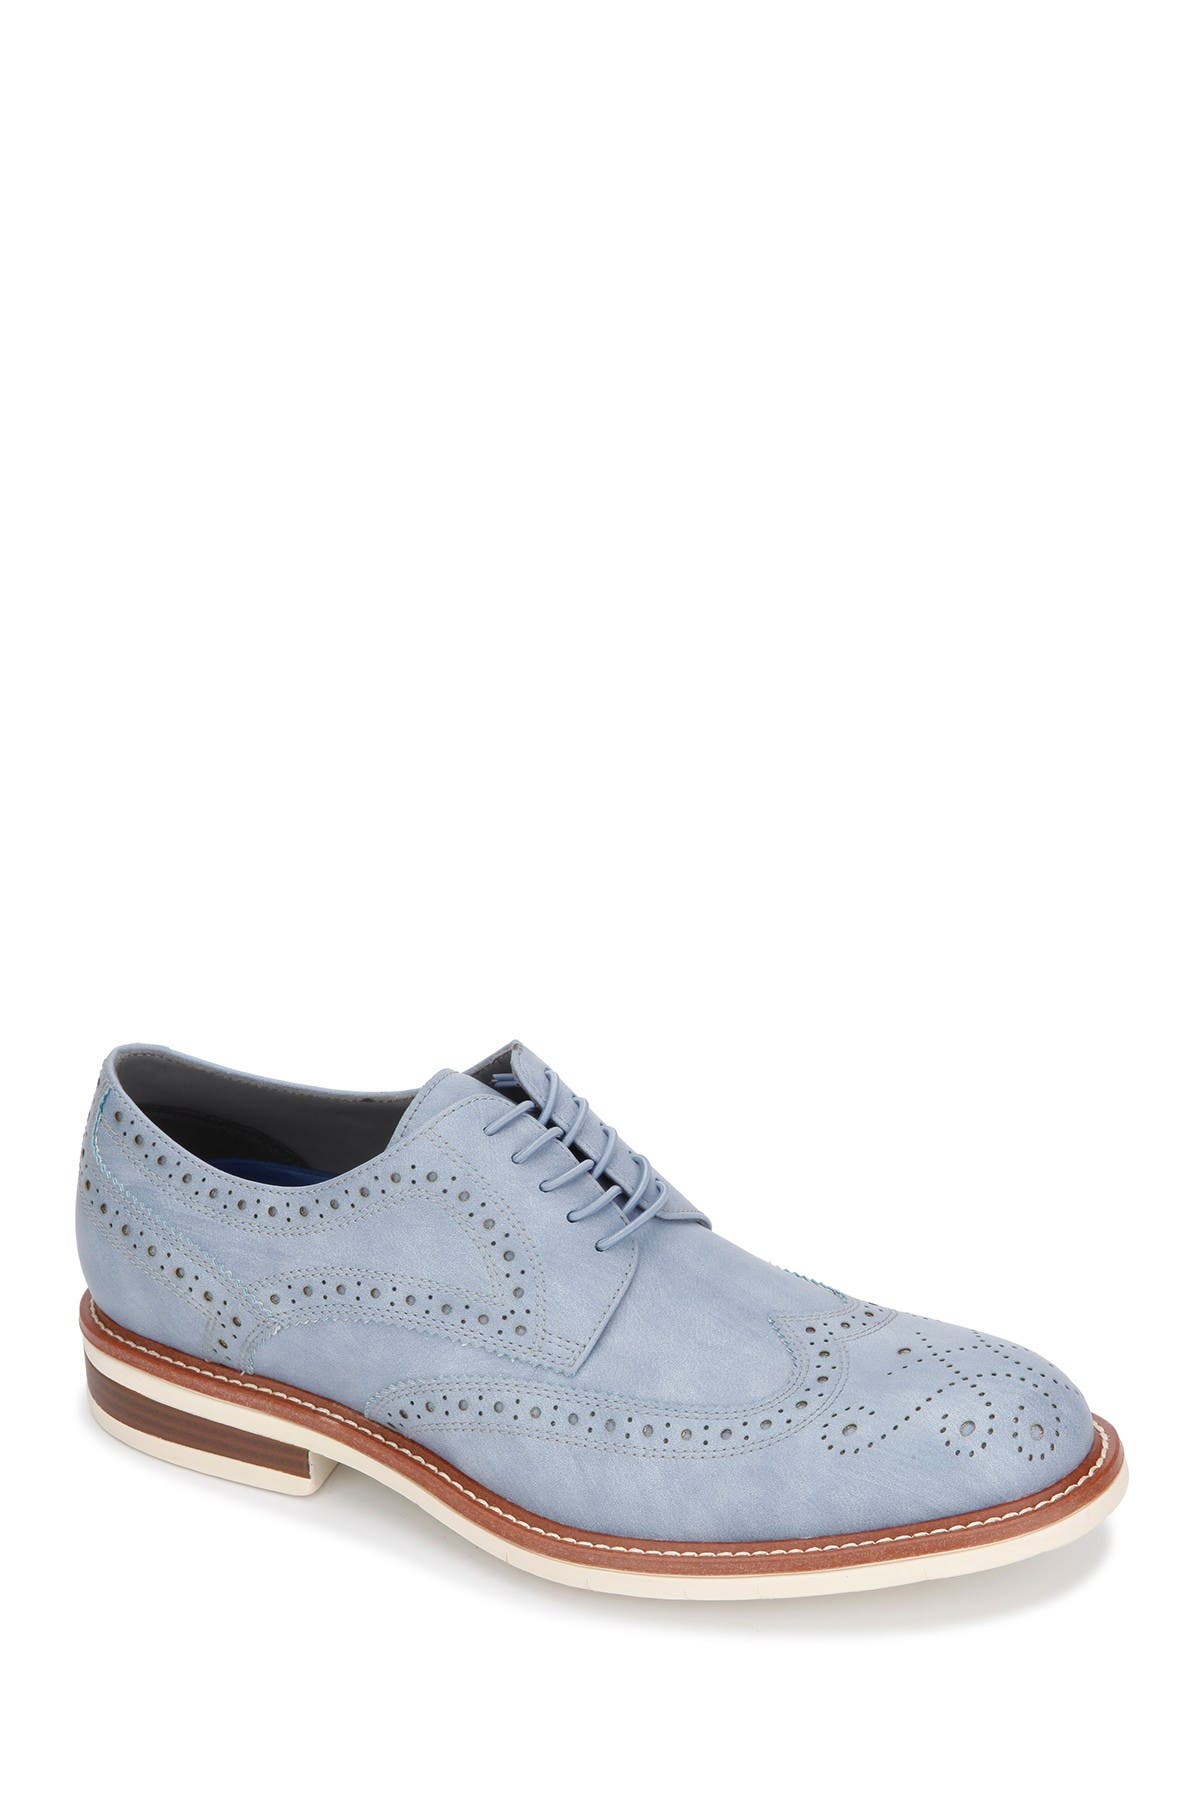 Kenneth Cole Klay Flex Lace-up Oxford In Light/pastel Blue5